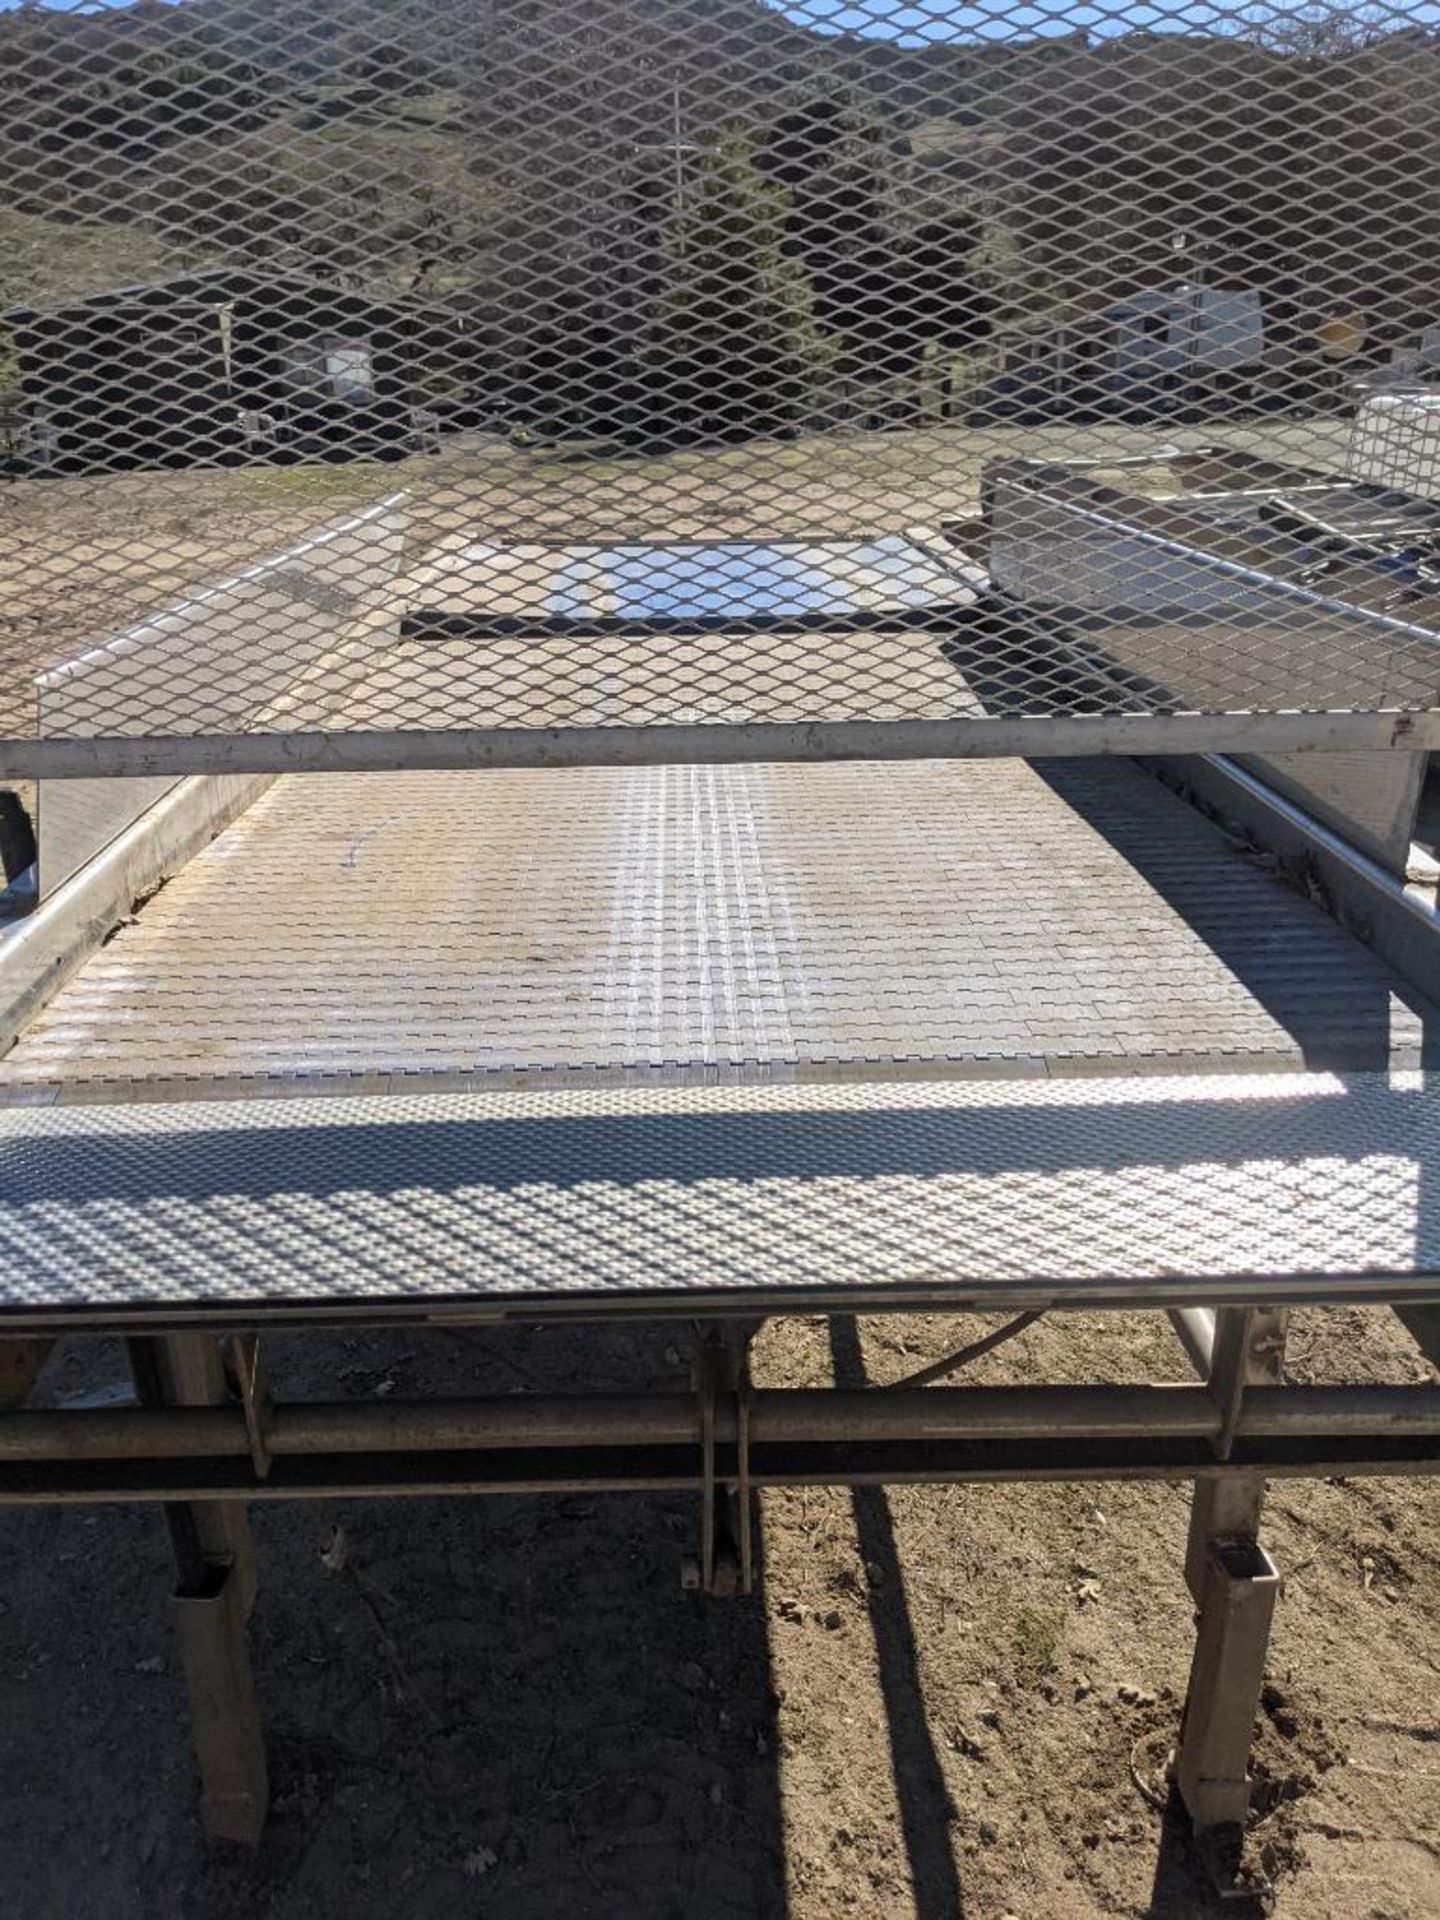 36in wide x 112in long Ohi stainless steel conveyor - Image 21 of 24